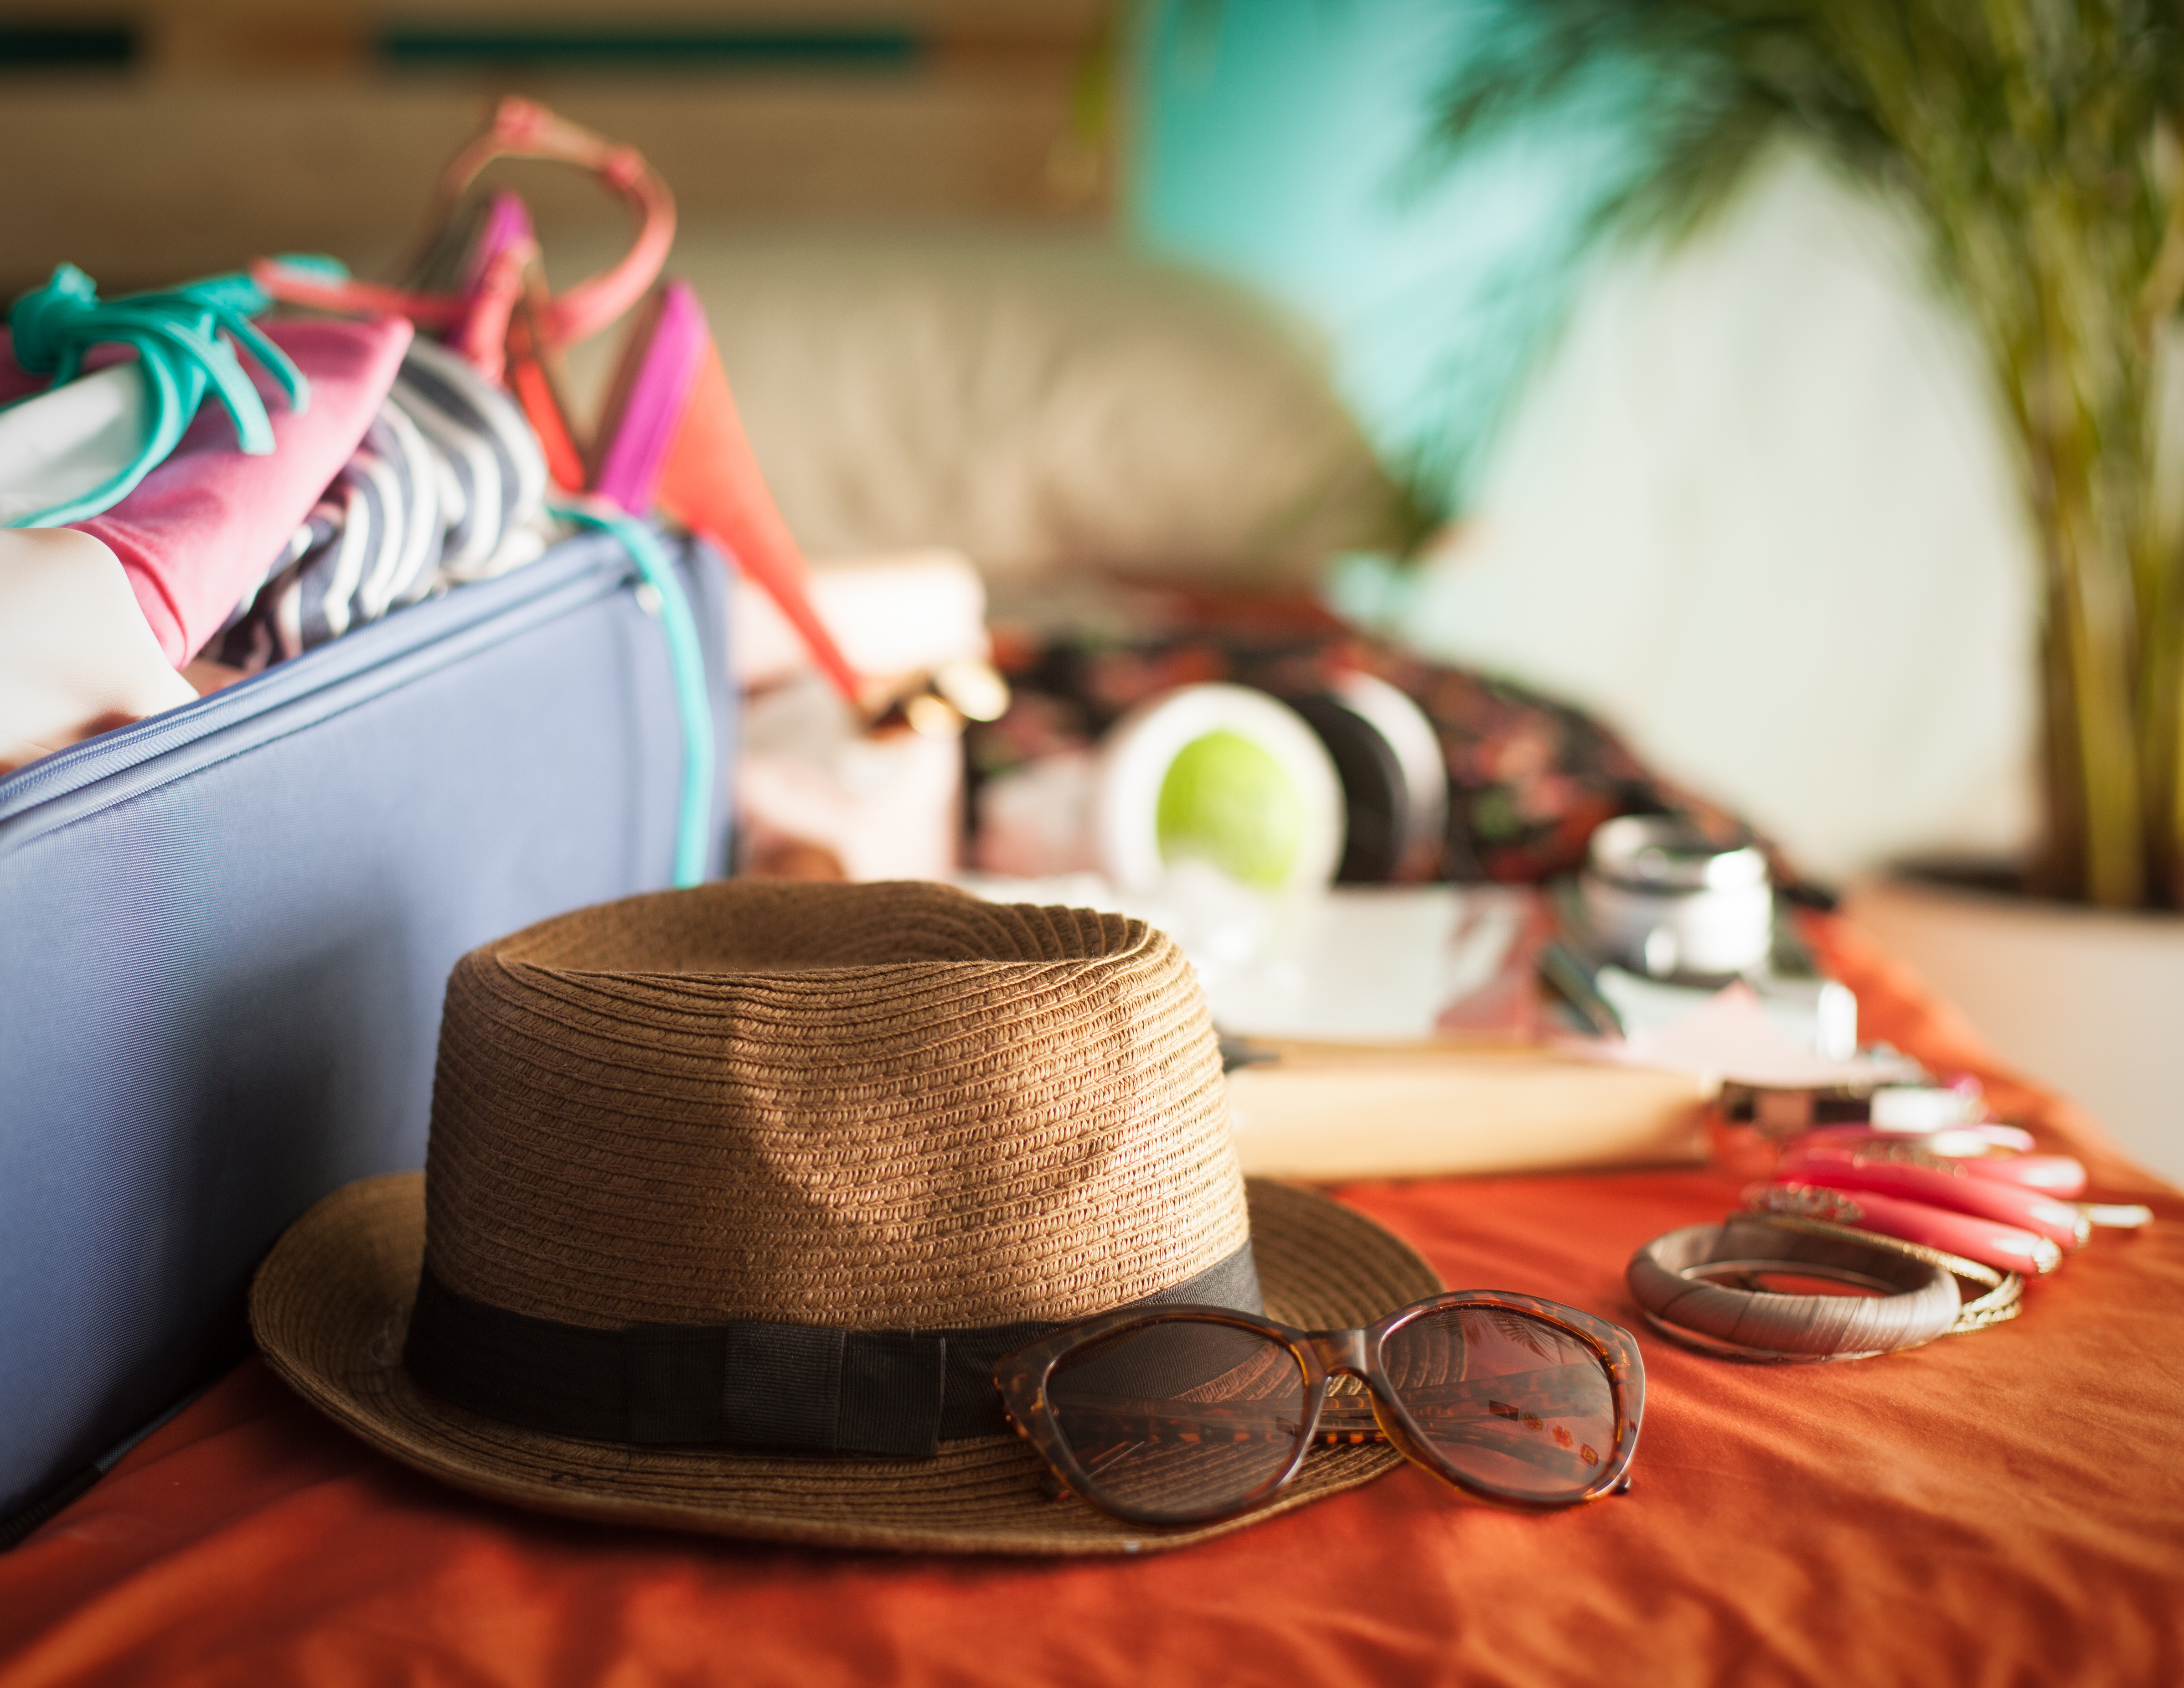 A woman's belongings strewn around a room | Source: Shutterstock